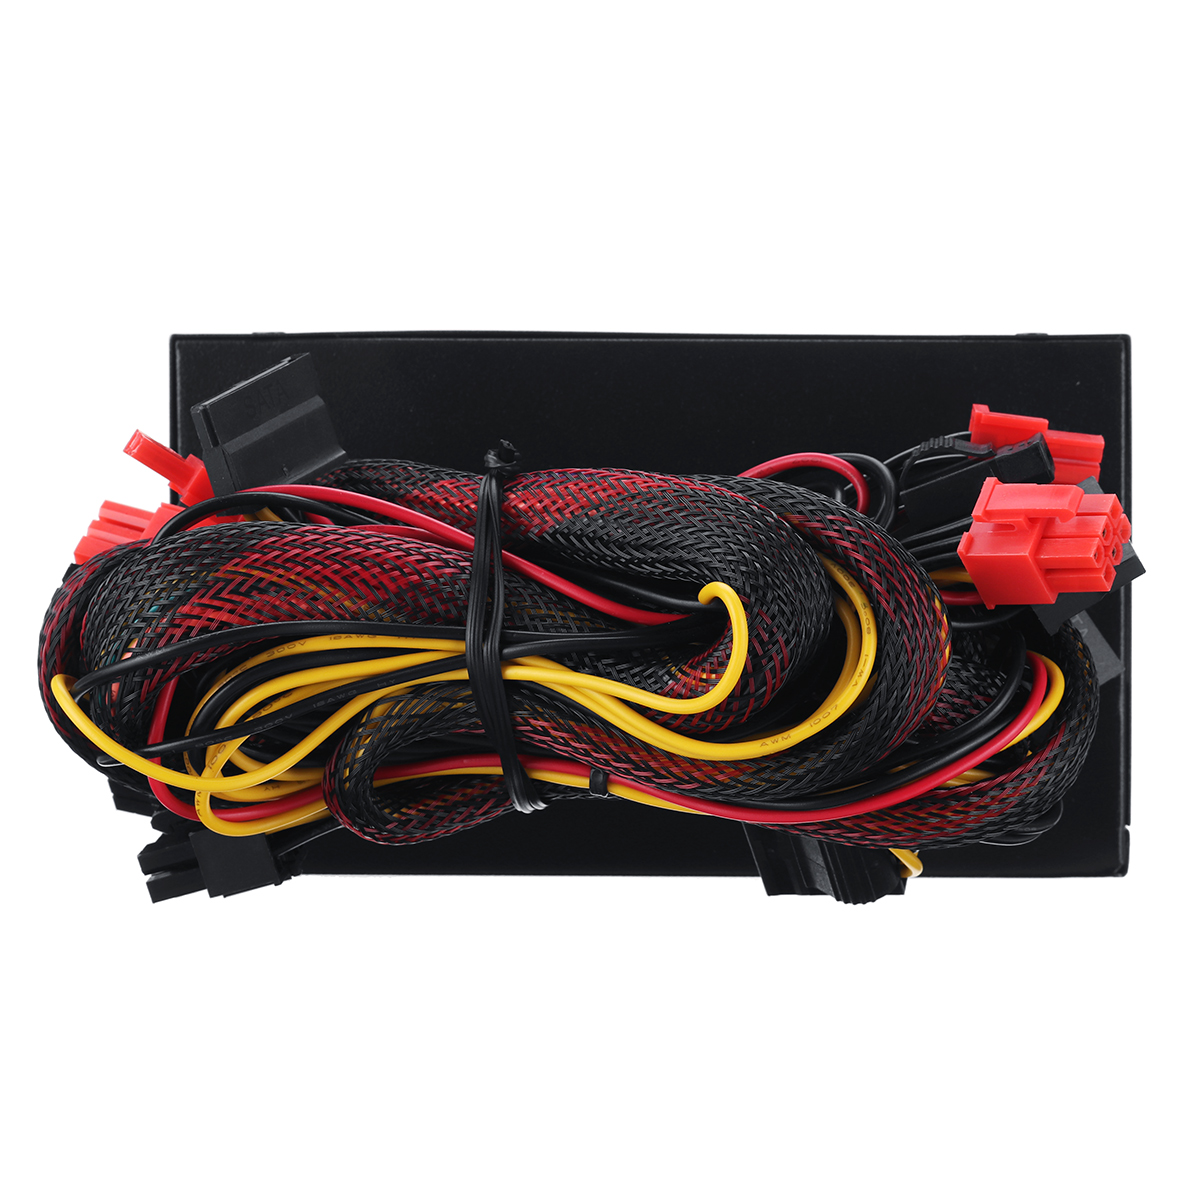 Find 1000W ATX 12V 2 31 PC Power Supply PFC INTEL ATX12V 2 31 8PIN 2x6PIN LED Fan Computer for Sale on Gipsybee.com with cryptocurrencies